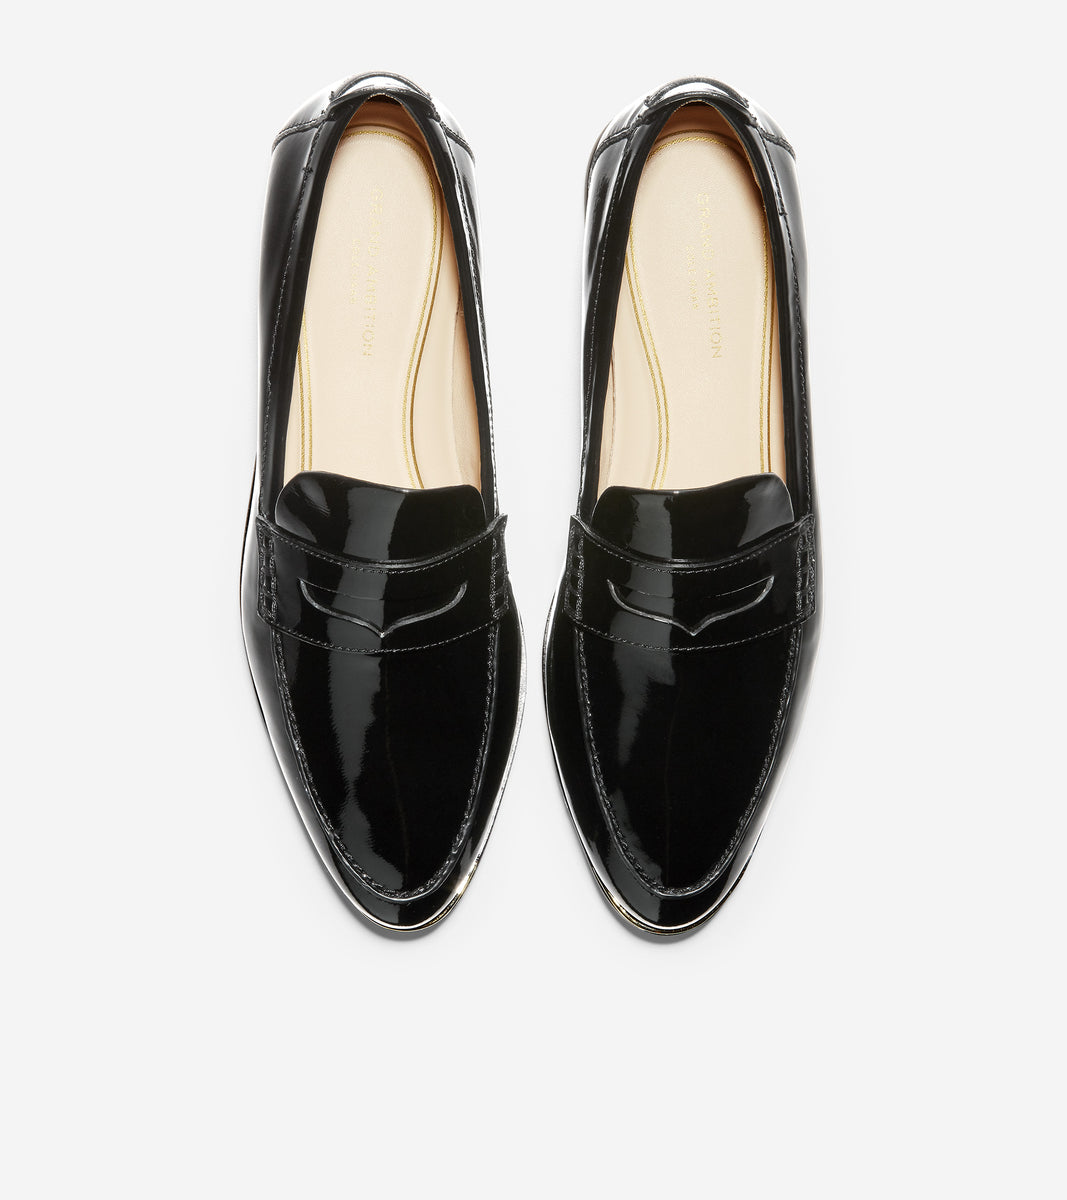 ColeHaan-Grand Ambition Troy Slip-On Sneaker-w19836-Black Patent Leather